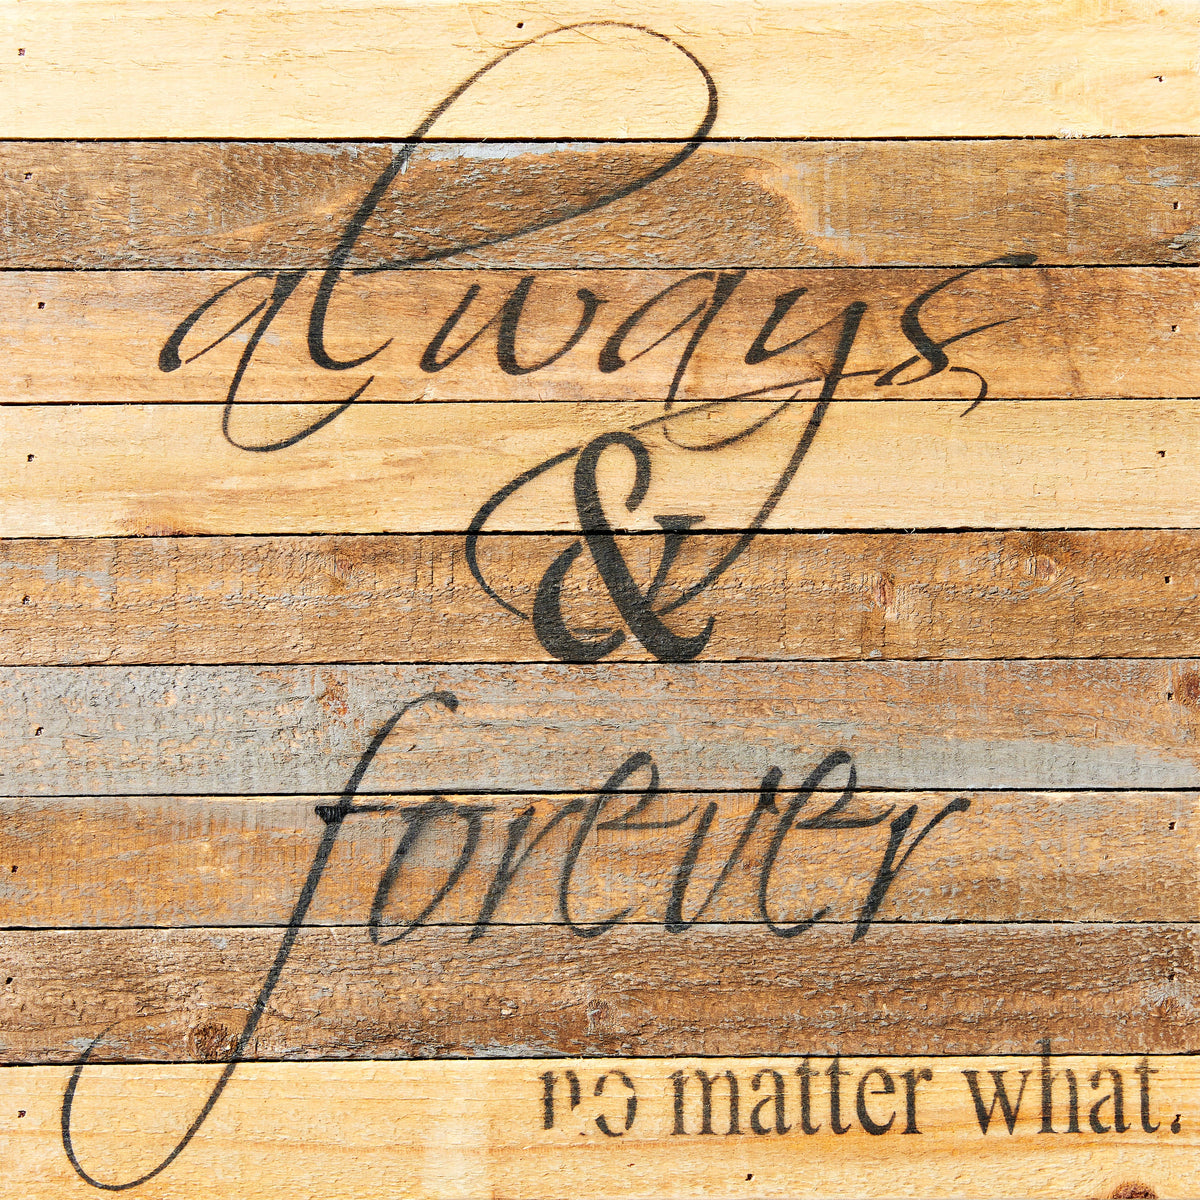 Always & Forever, No Matter What / 12x12 Reclaimed Wood Wall Art